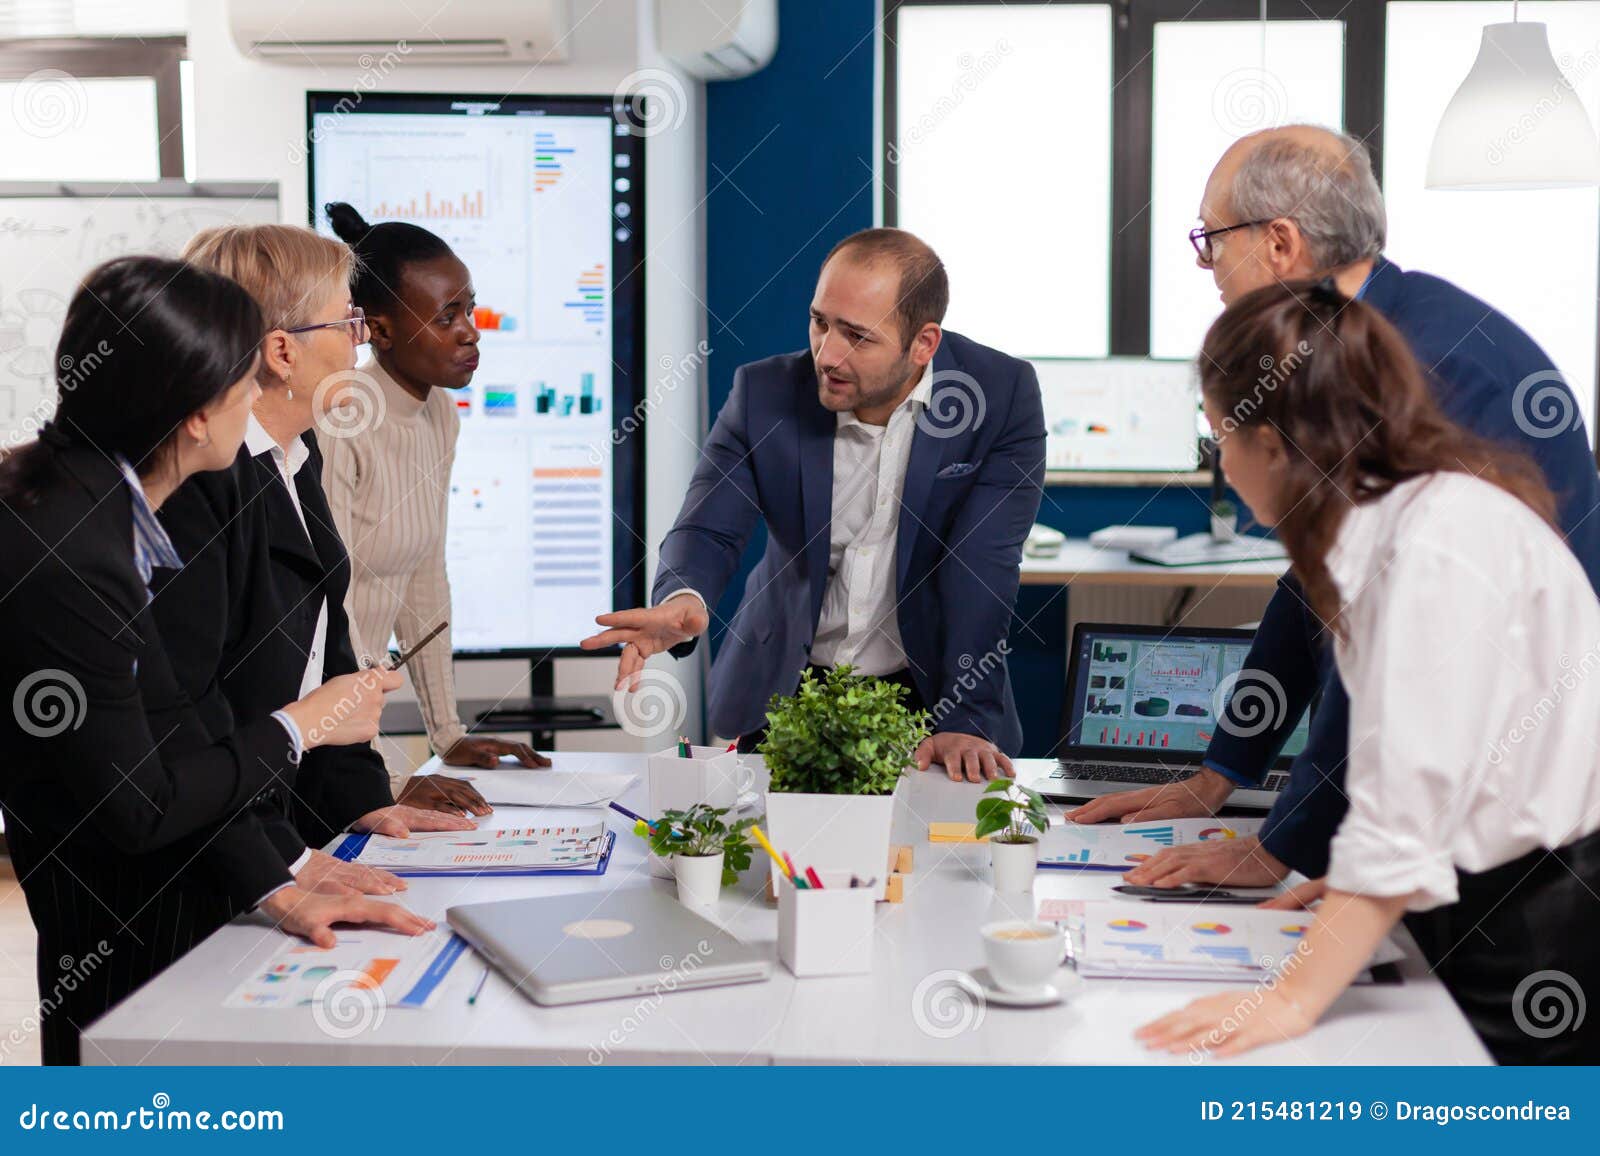 team manager in startup business discussing with mixedrace coworkers